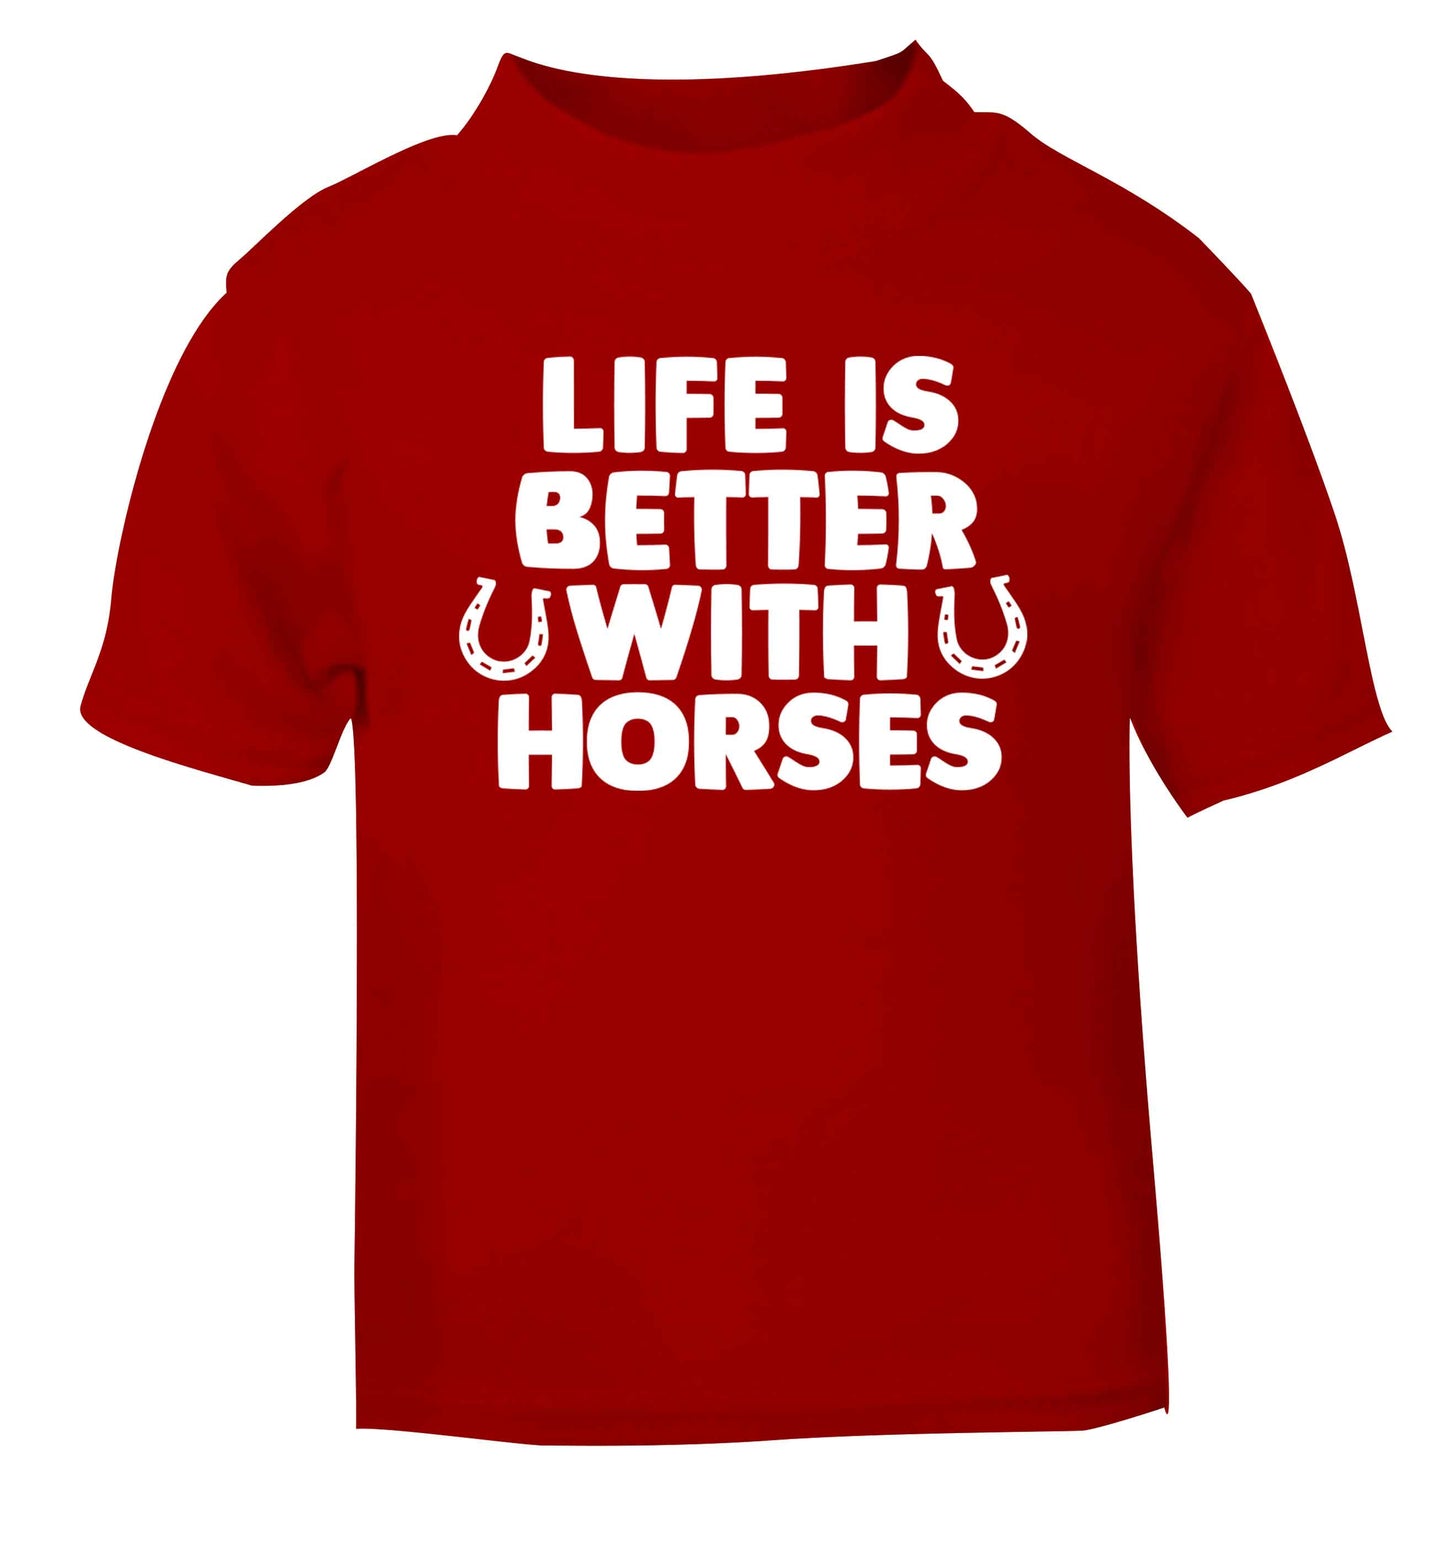 Life is better with horses red baby toddler Tshirt 2 Years